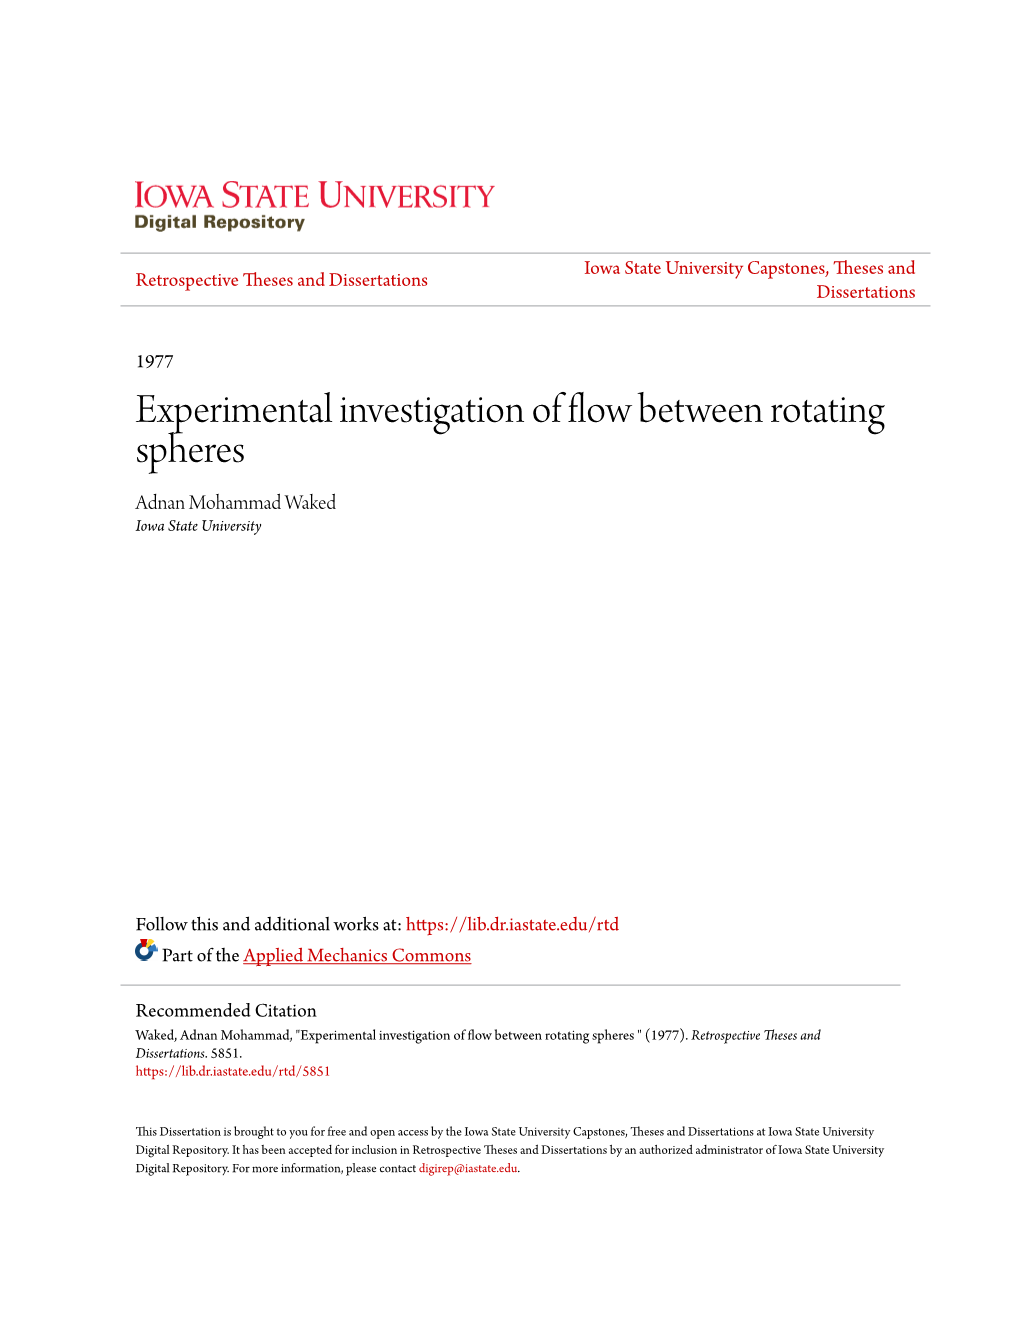 Experimental Investigation of Flow Between Rotating Spheres Adnan Mohammad Waked Iowa State University